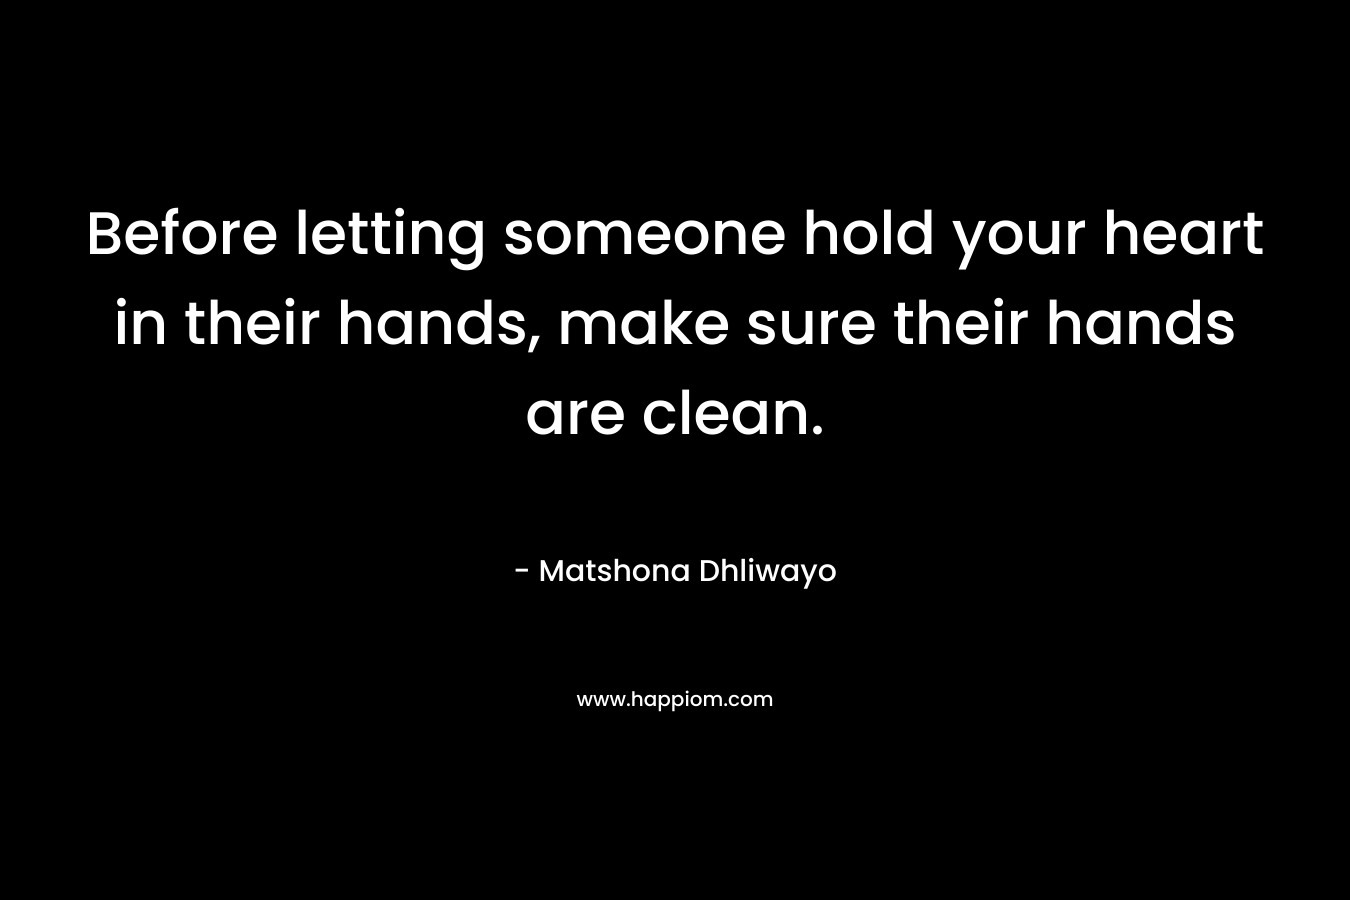 Before letting someone hold your heart in their hands, make sure their hands are clean.